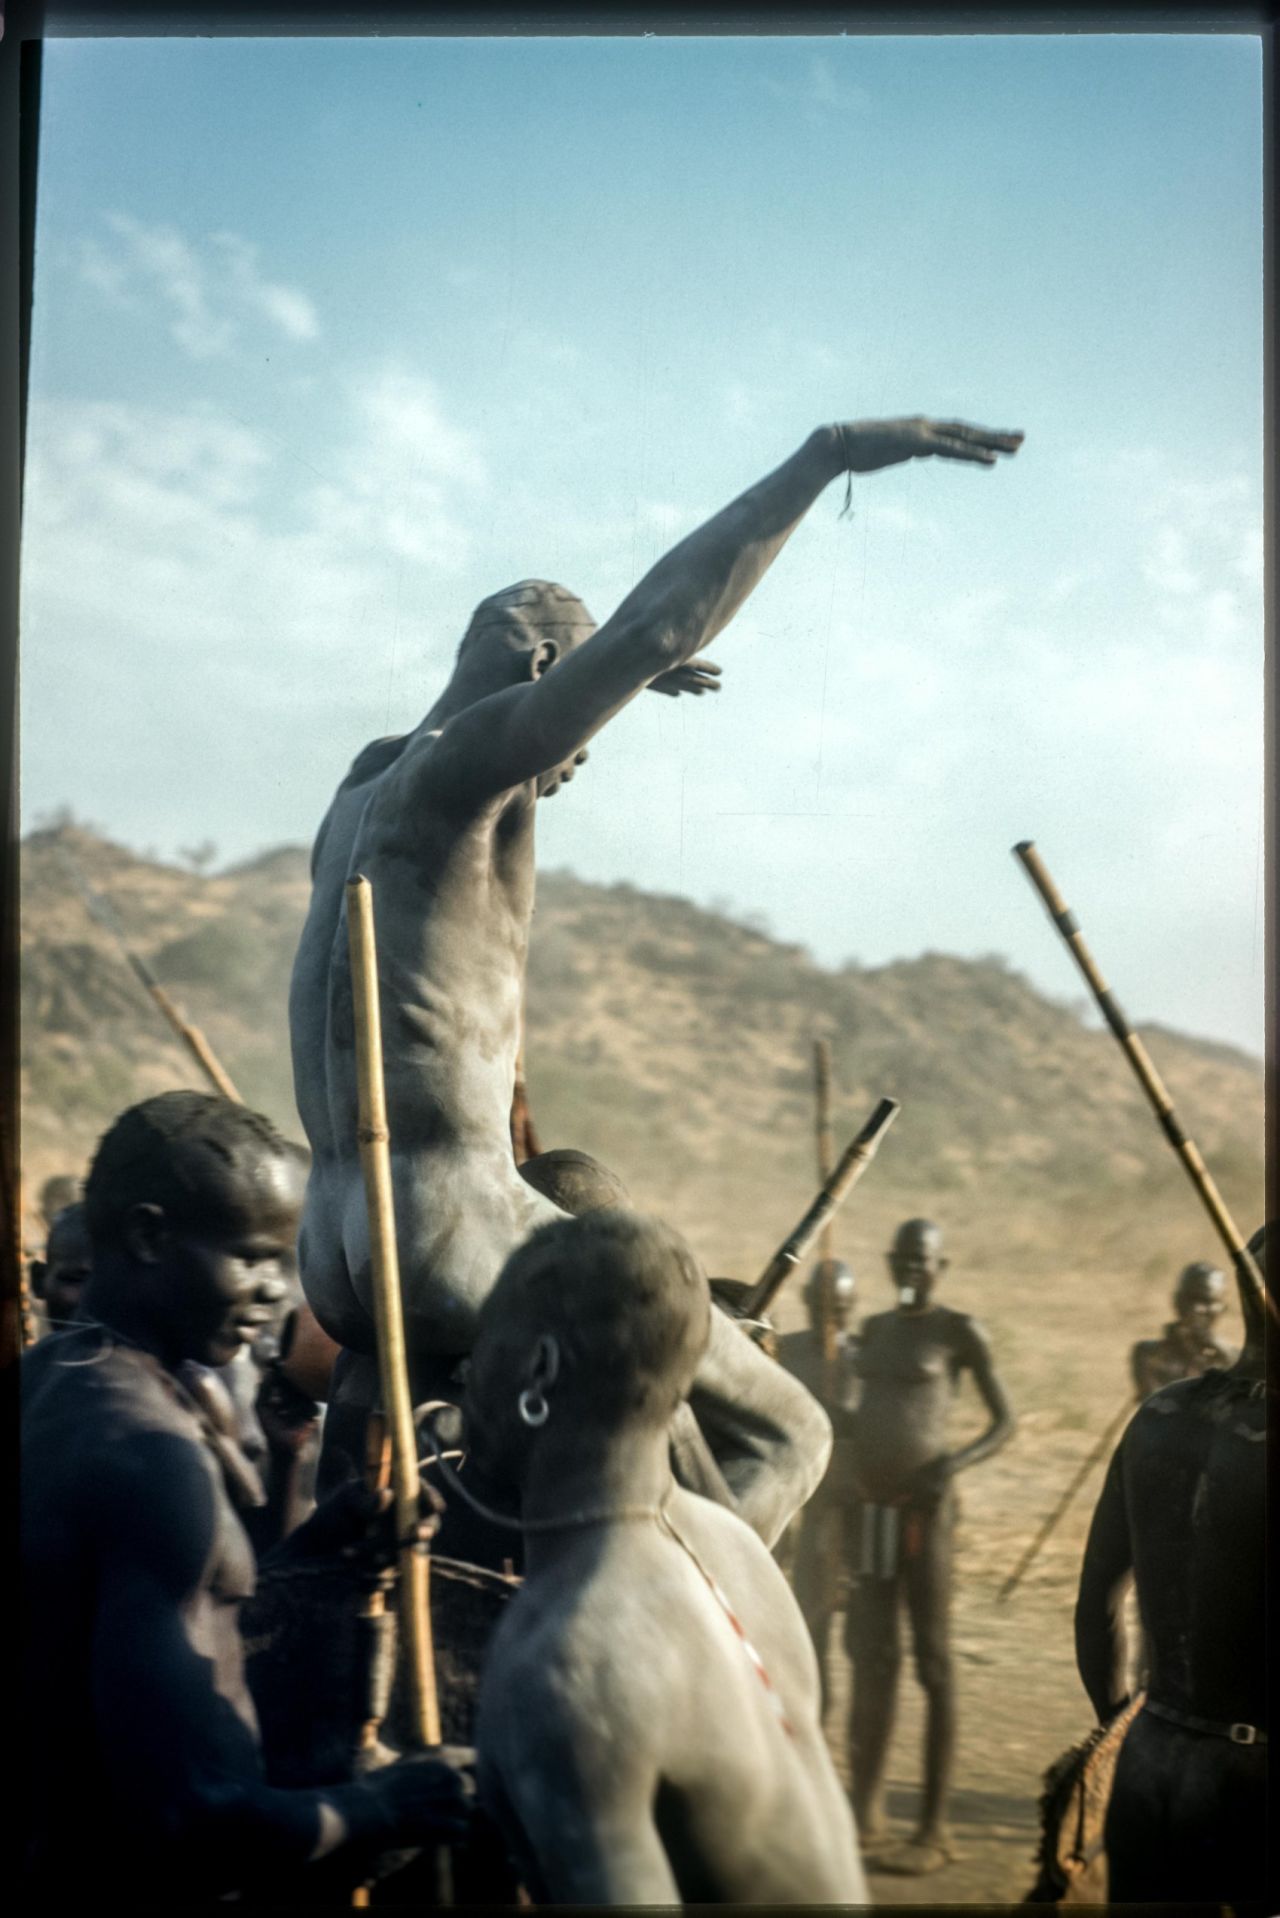 In Korongo Nuba wrestling, the champion is carried on the shoulders of the defeated party in what's known as "the chairing of the victor."